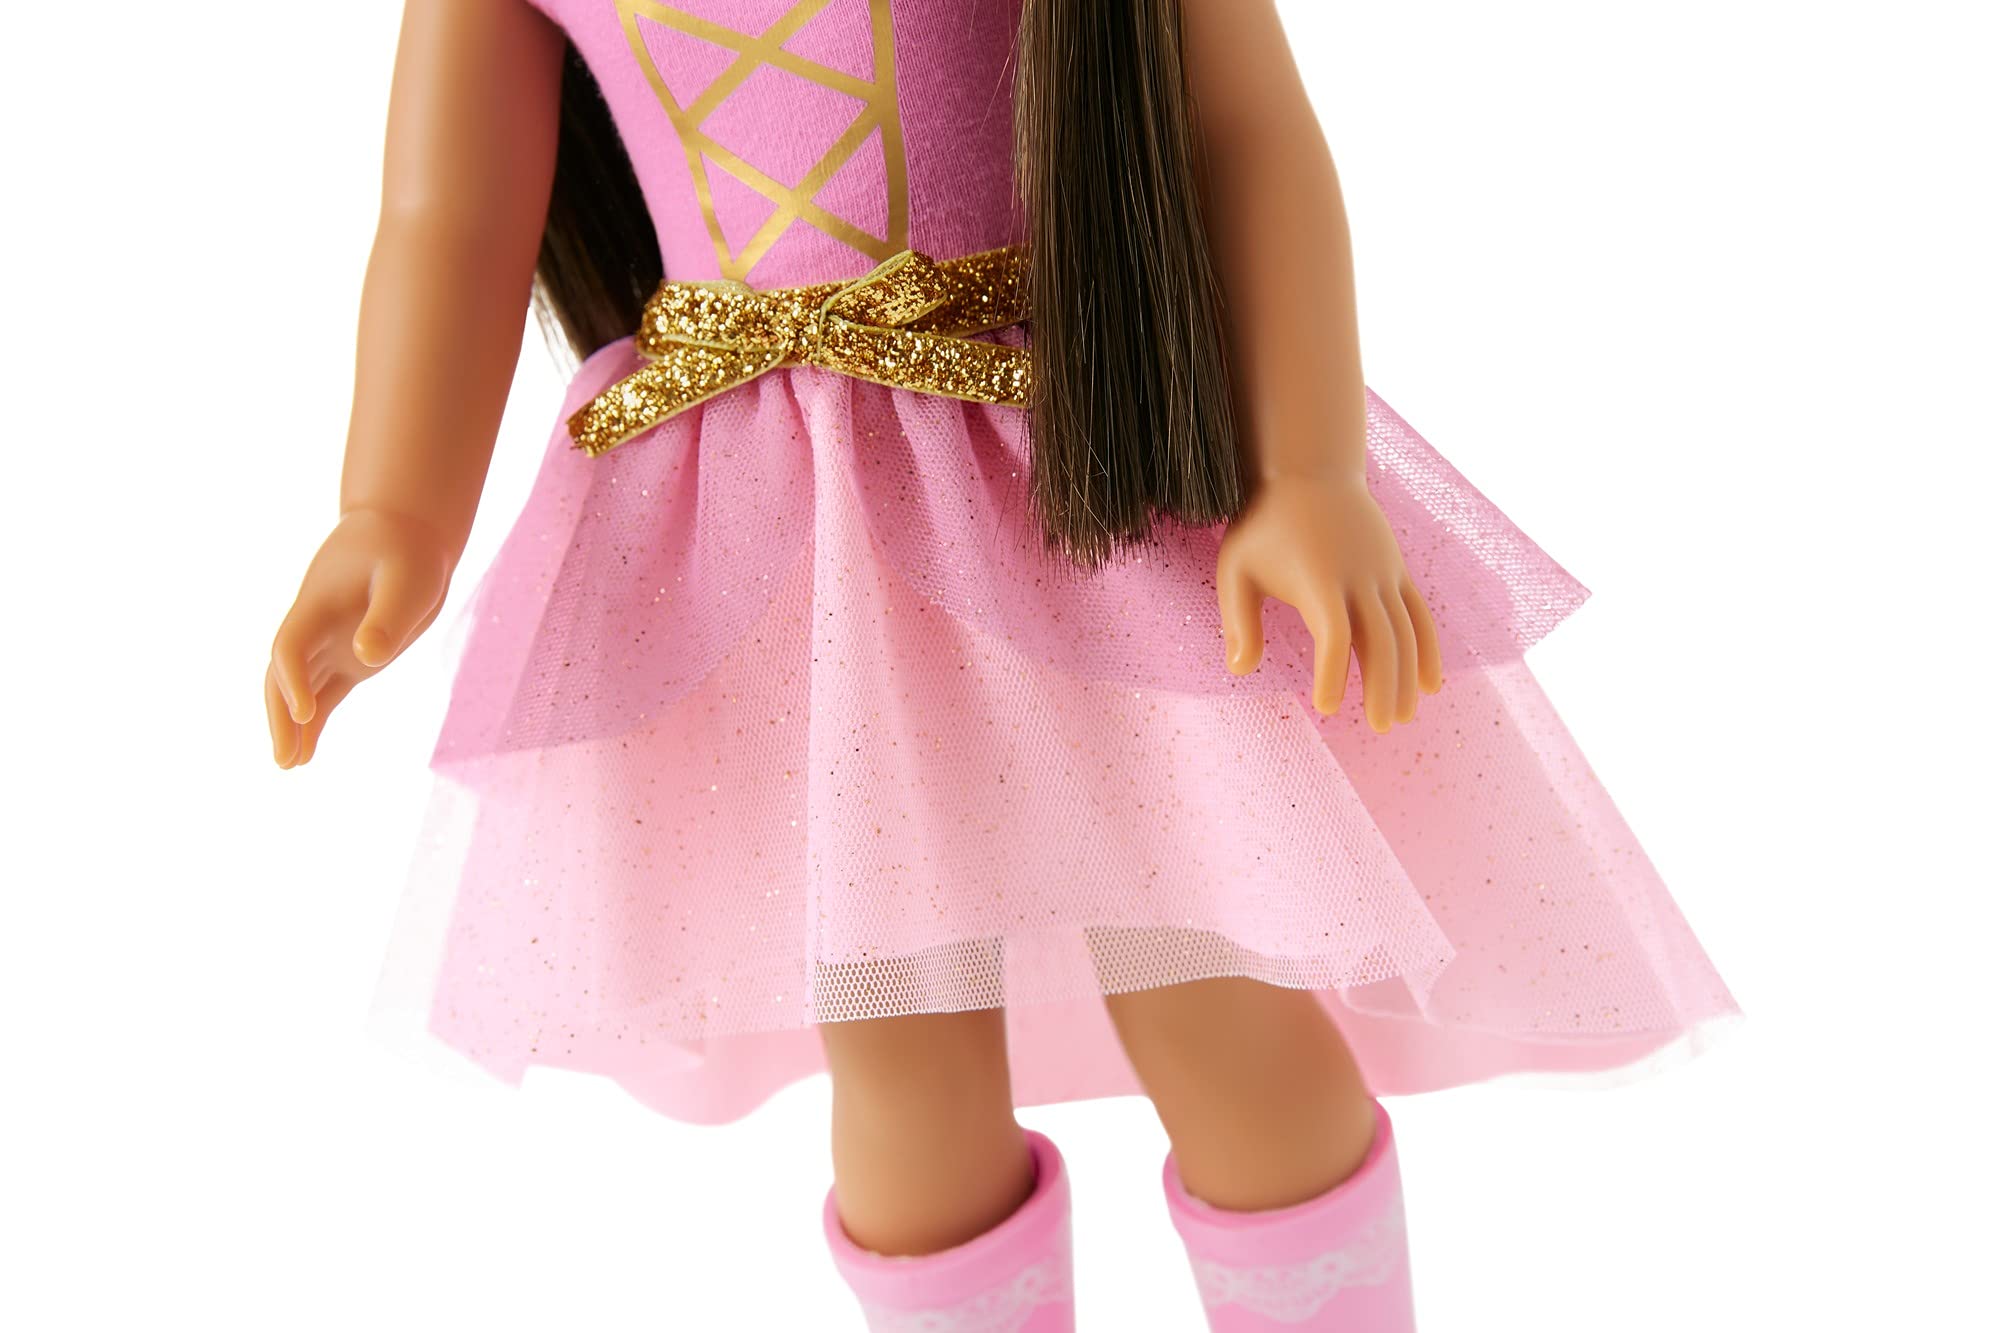 American Girl WellieWishers Ashlyn 14.5-inch Doll with Brown Eyes, Freckled Cheeks, Long Brown Hair, Petal-Pink Leotard, Detachable Pink Glitter Skirt, Ages 4+